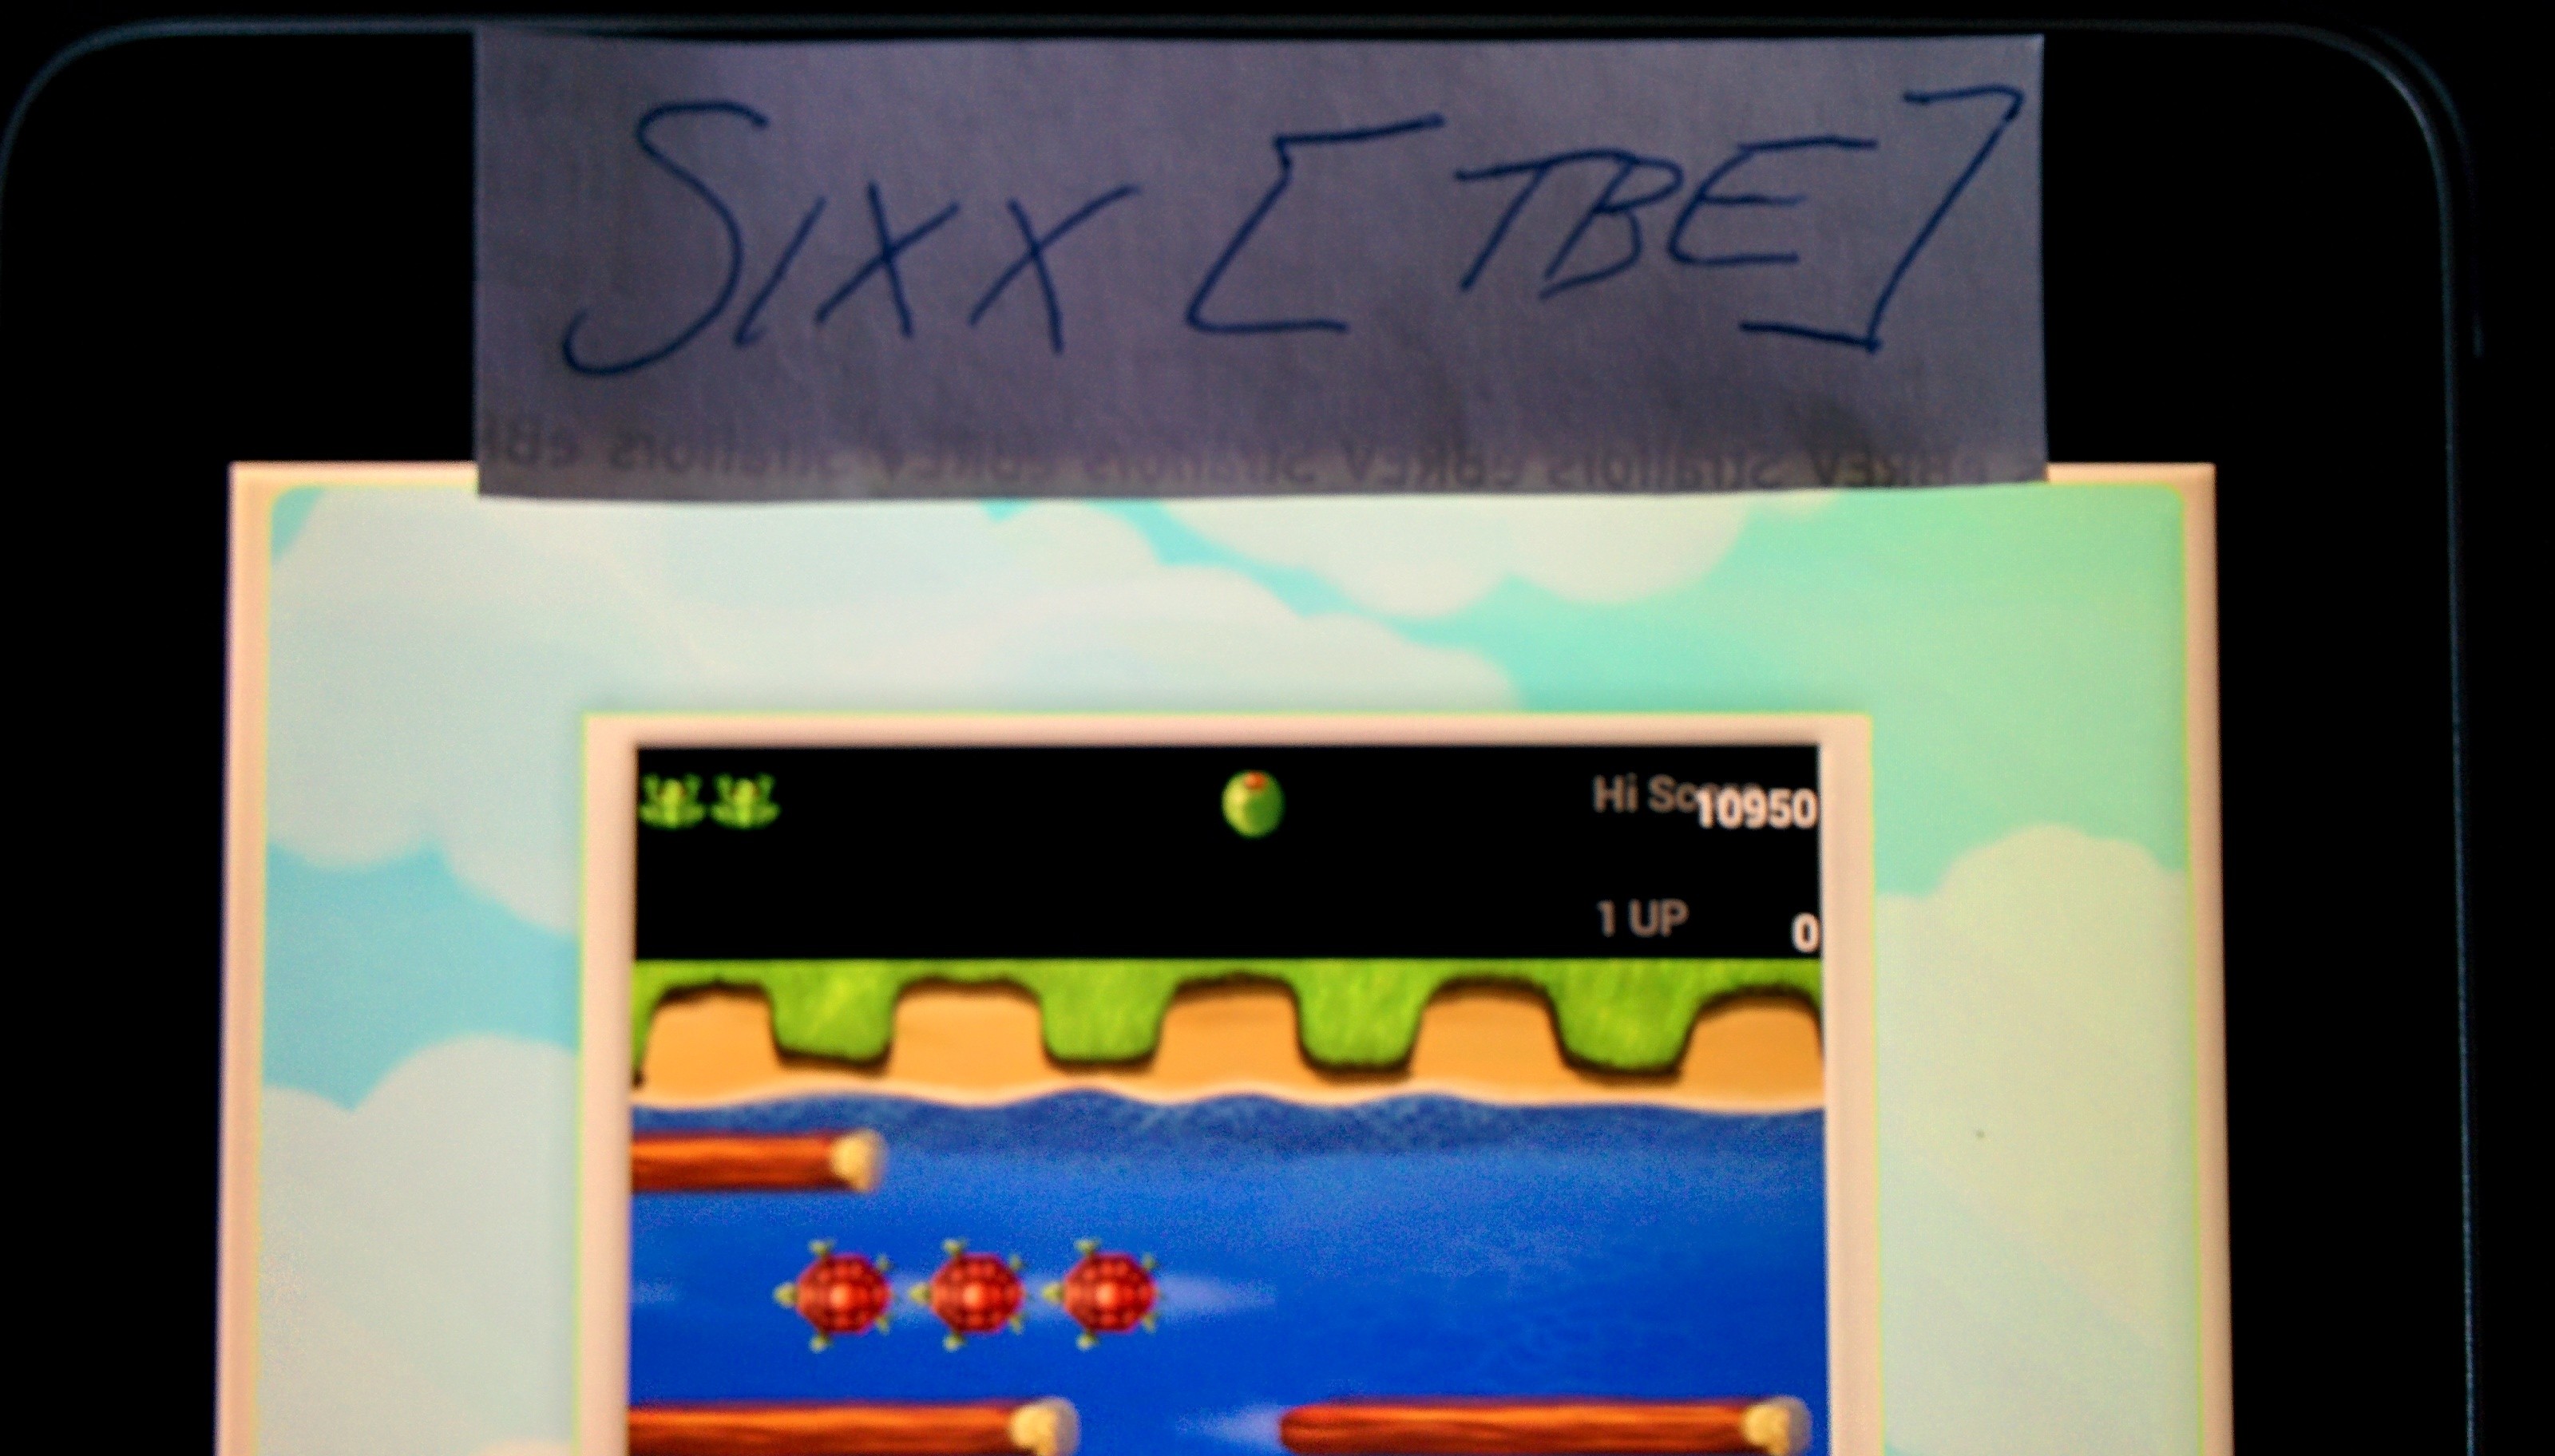 Sixx: Frogger (Android) 10,950 points on 2014-08-26 11:55:38